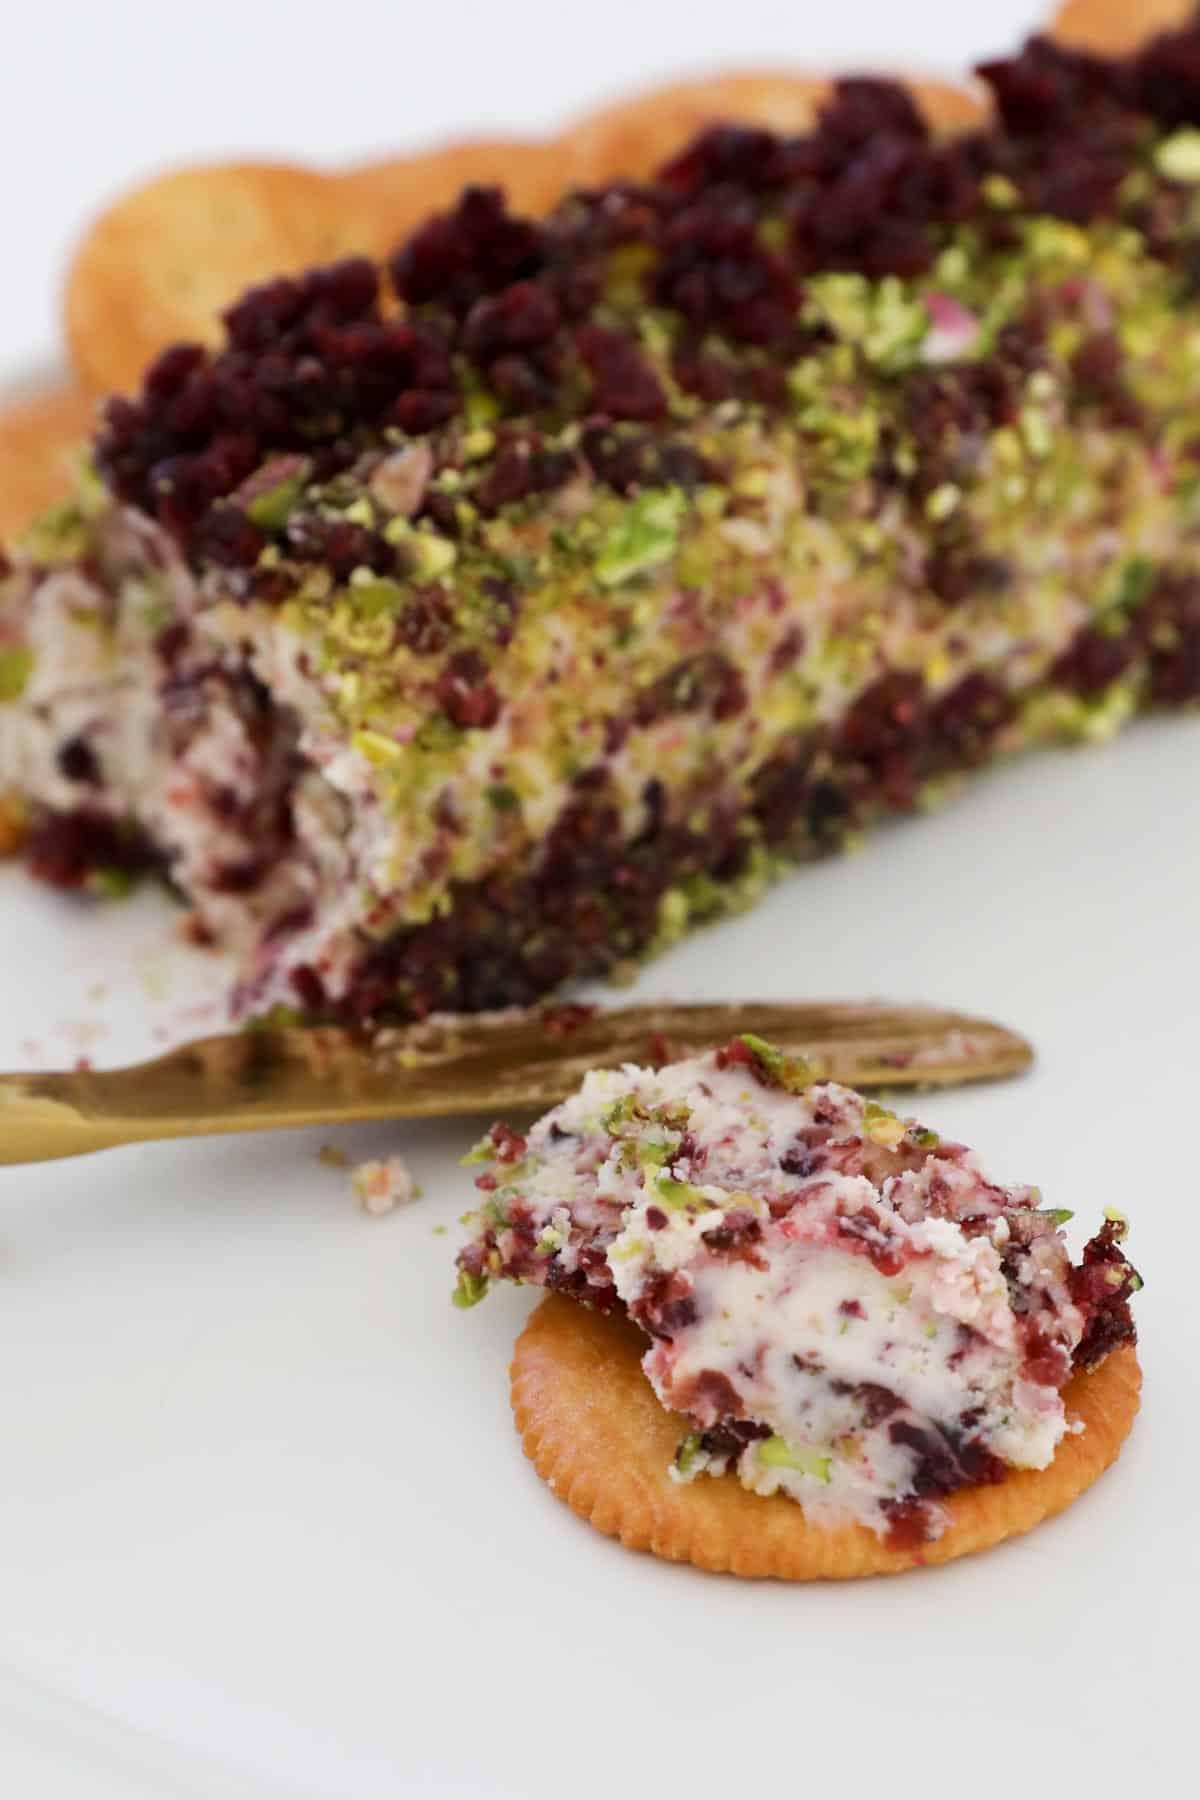 Cranberry pistacho cheese log spread on a cracker.